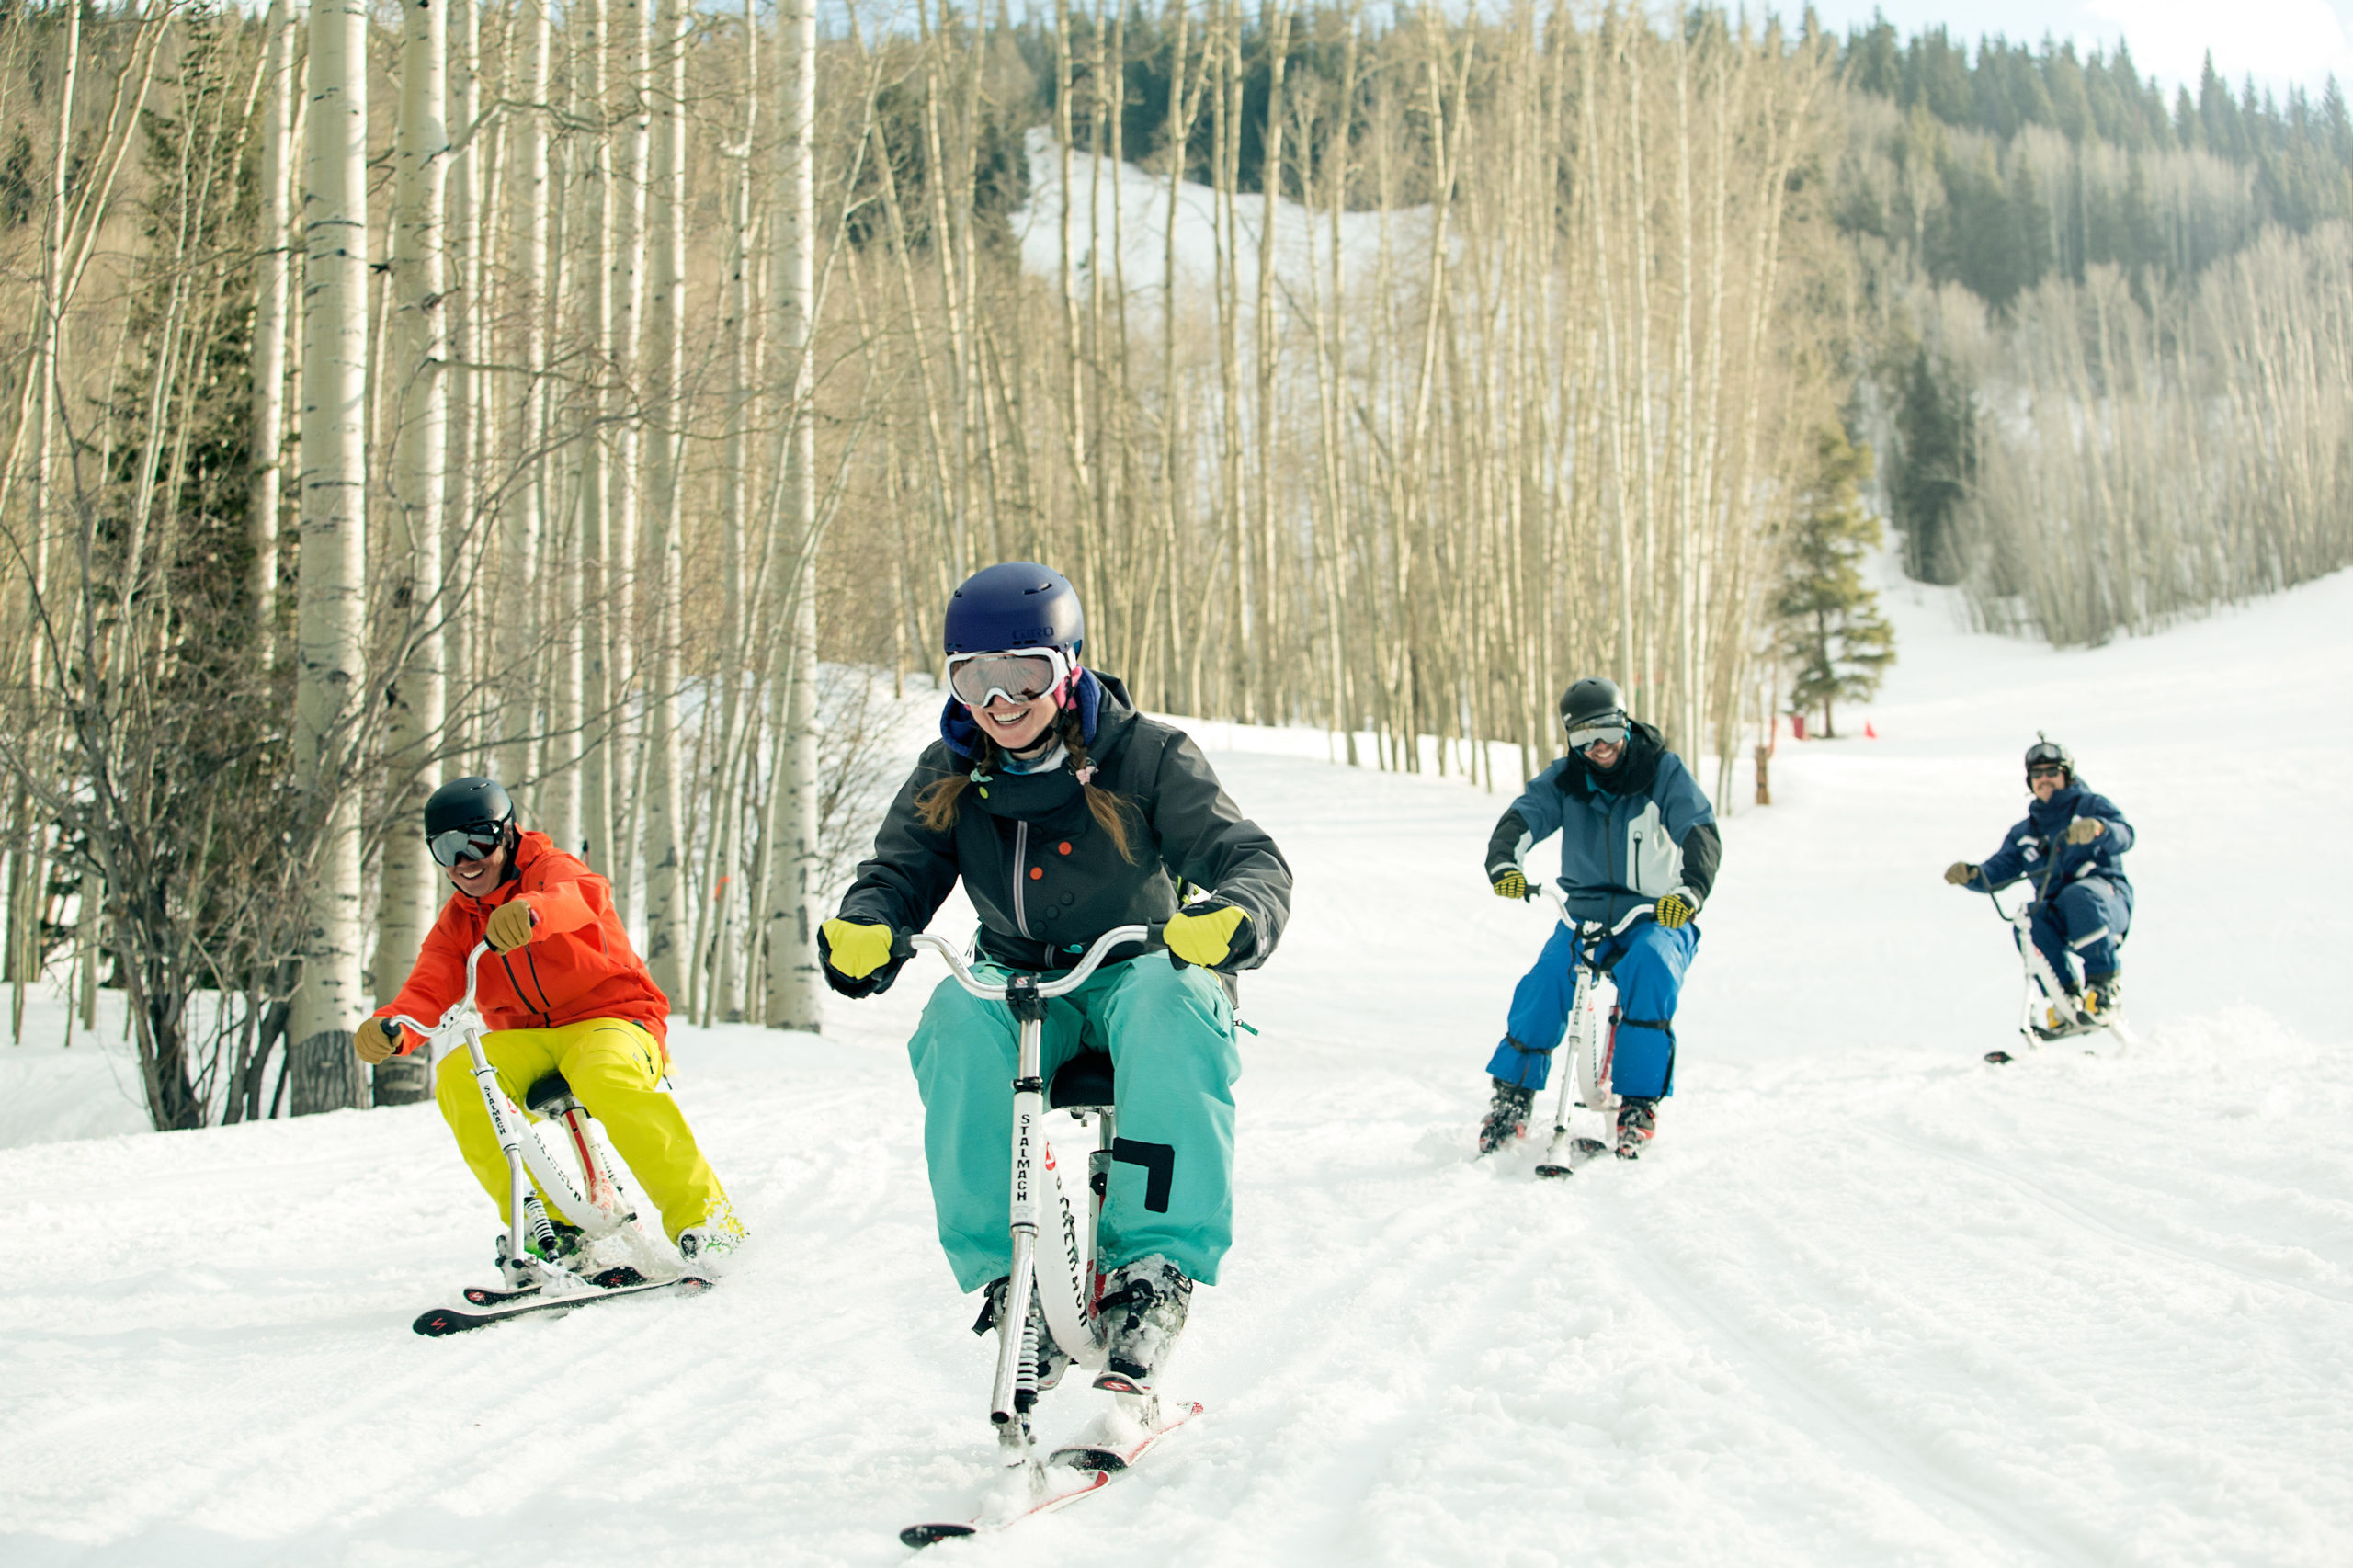 Vail Ski Resort AllInclusive Packages On Sale Endless Turns